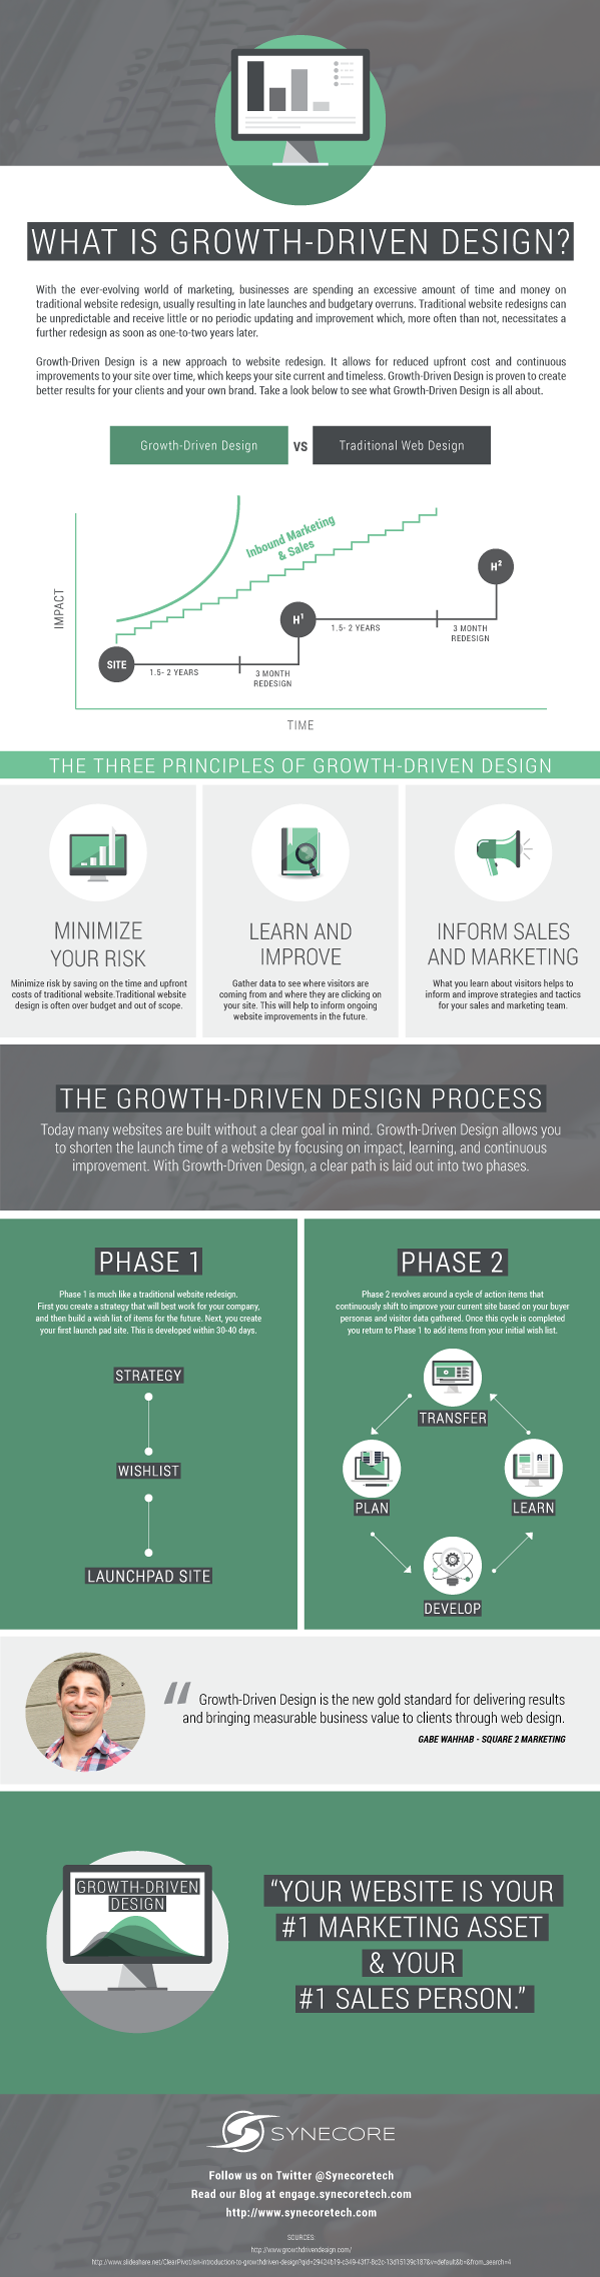 Growth Driven Design Infographic